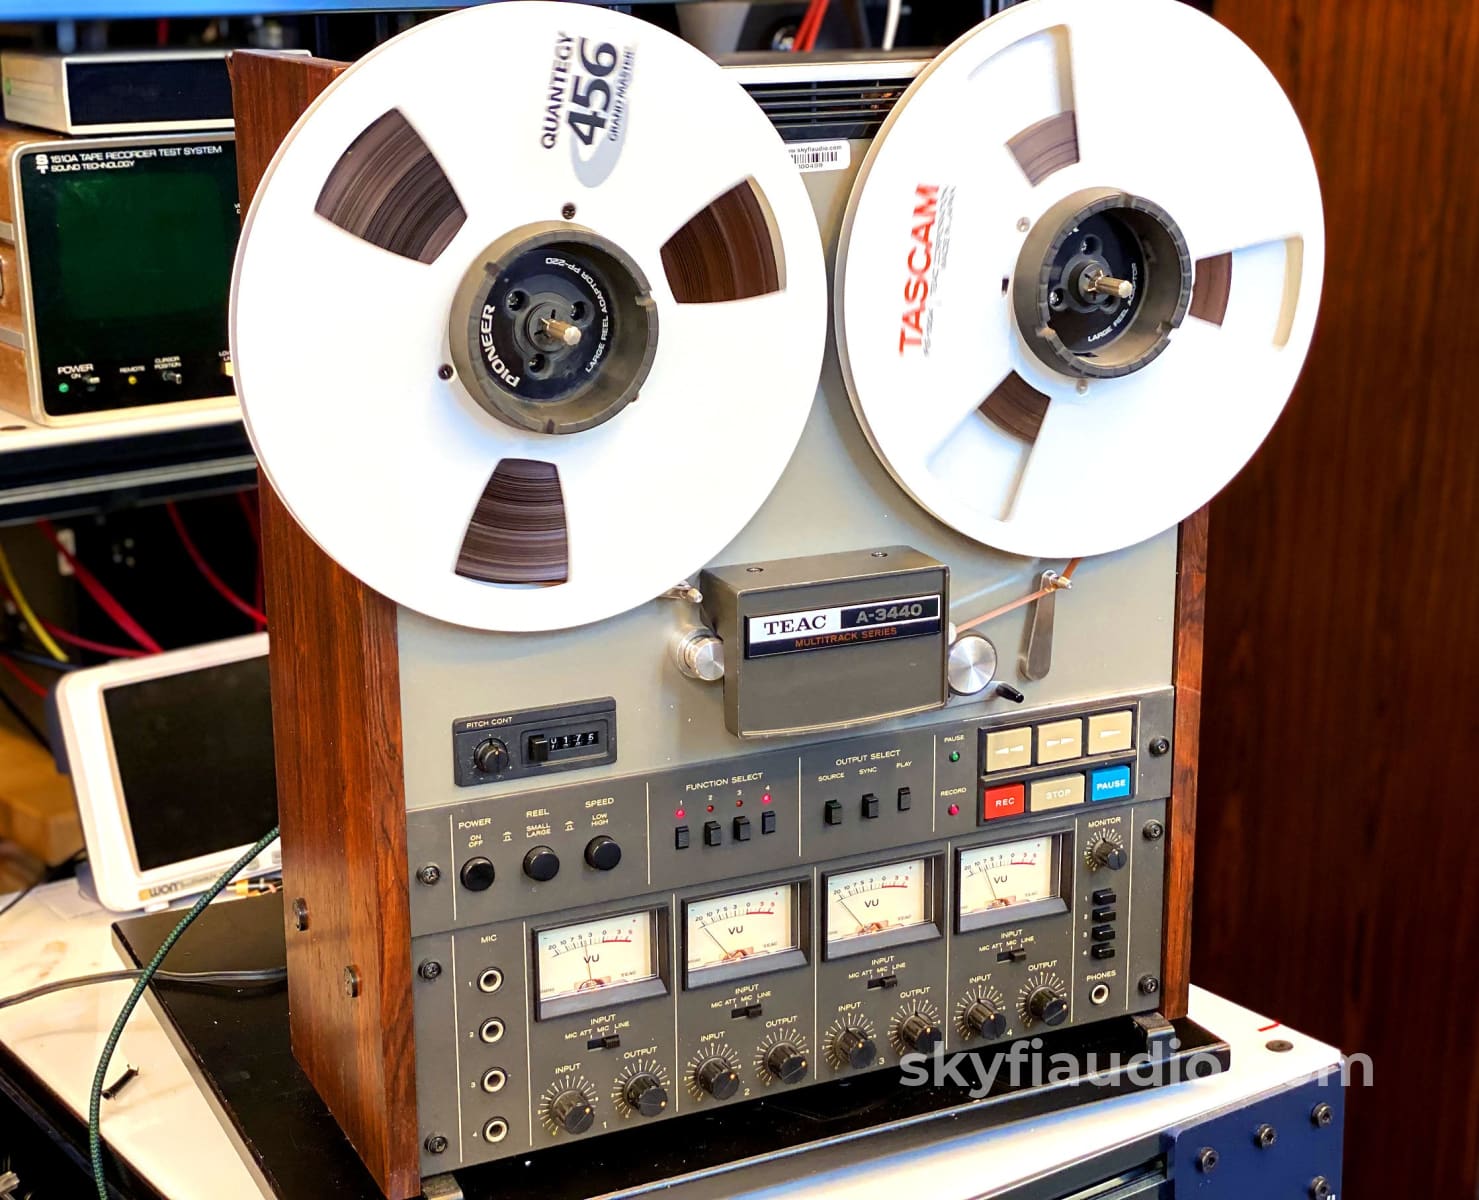 TEAC A-3440 4-Channel Reel to Reel Player/Recorder